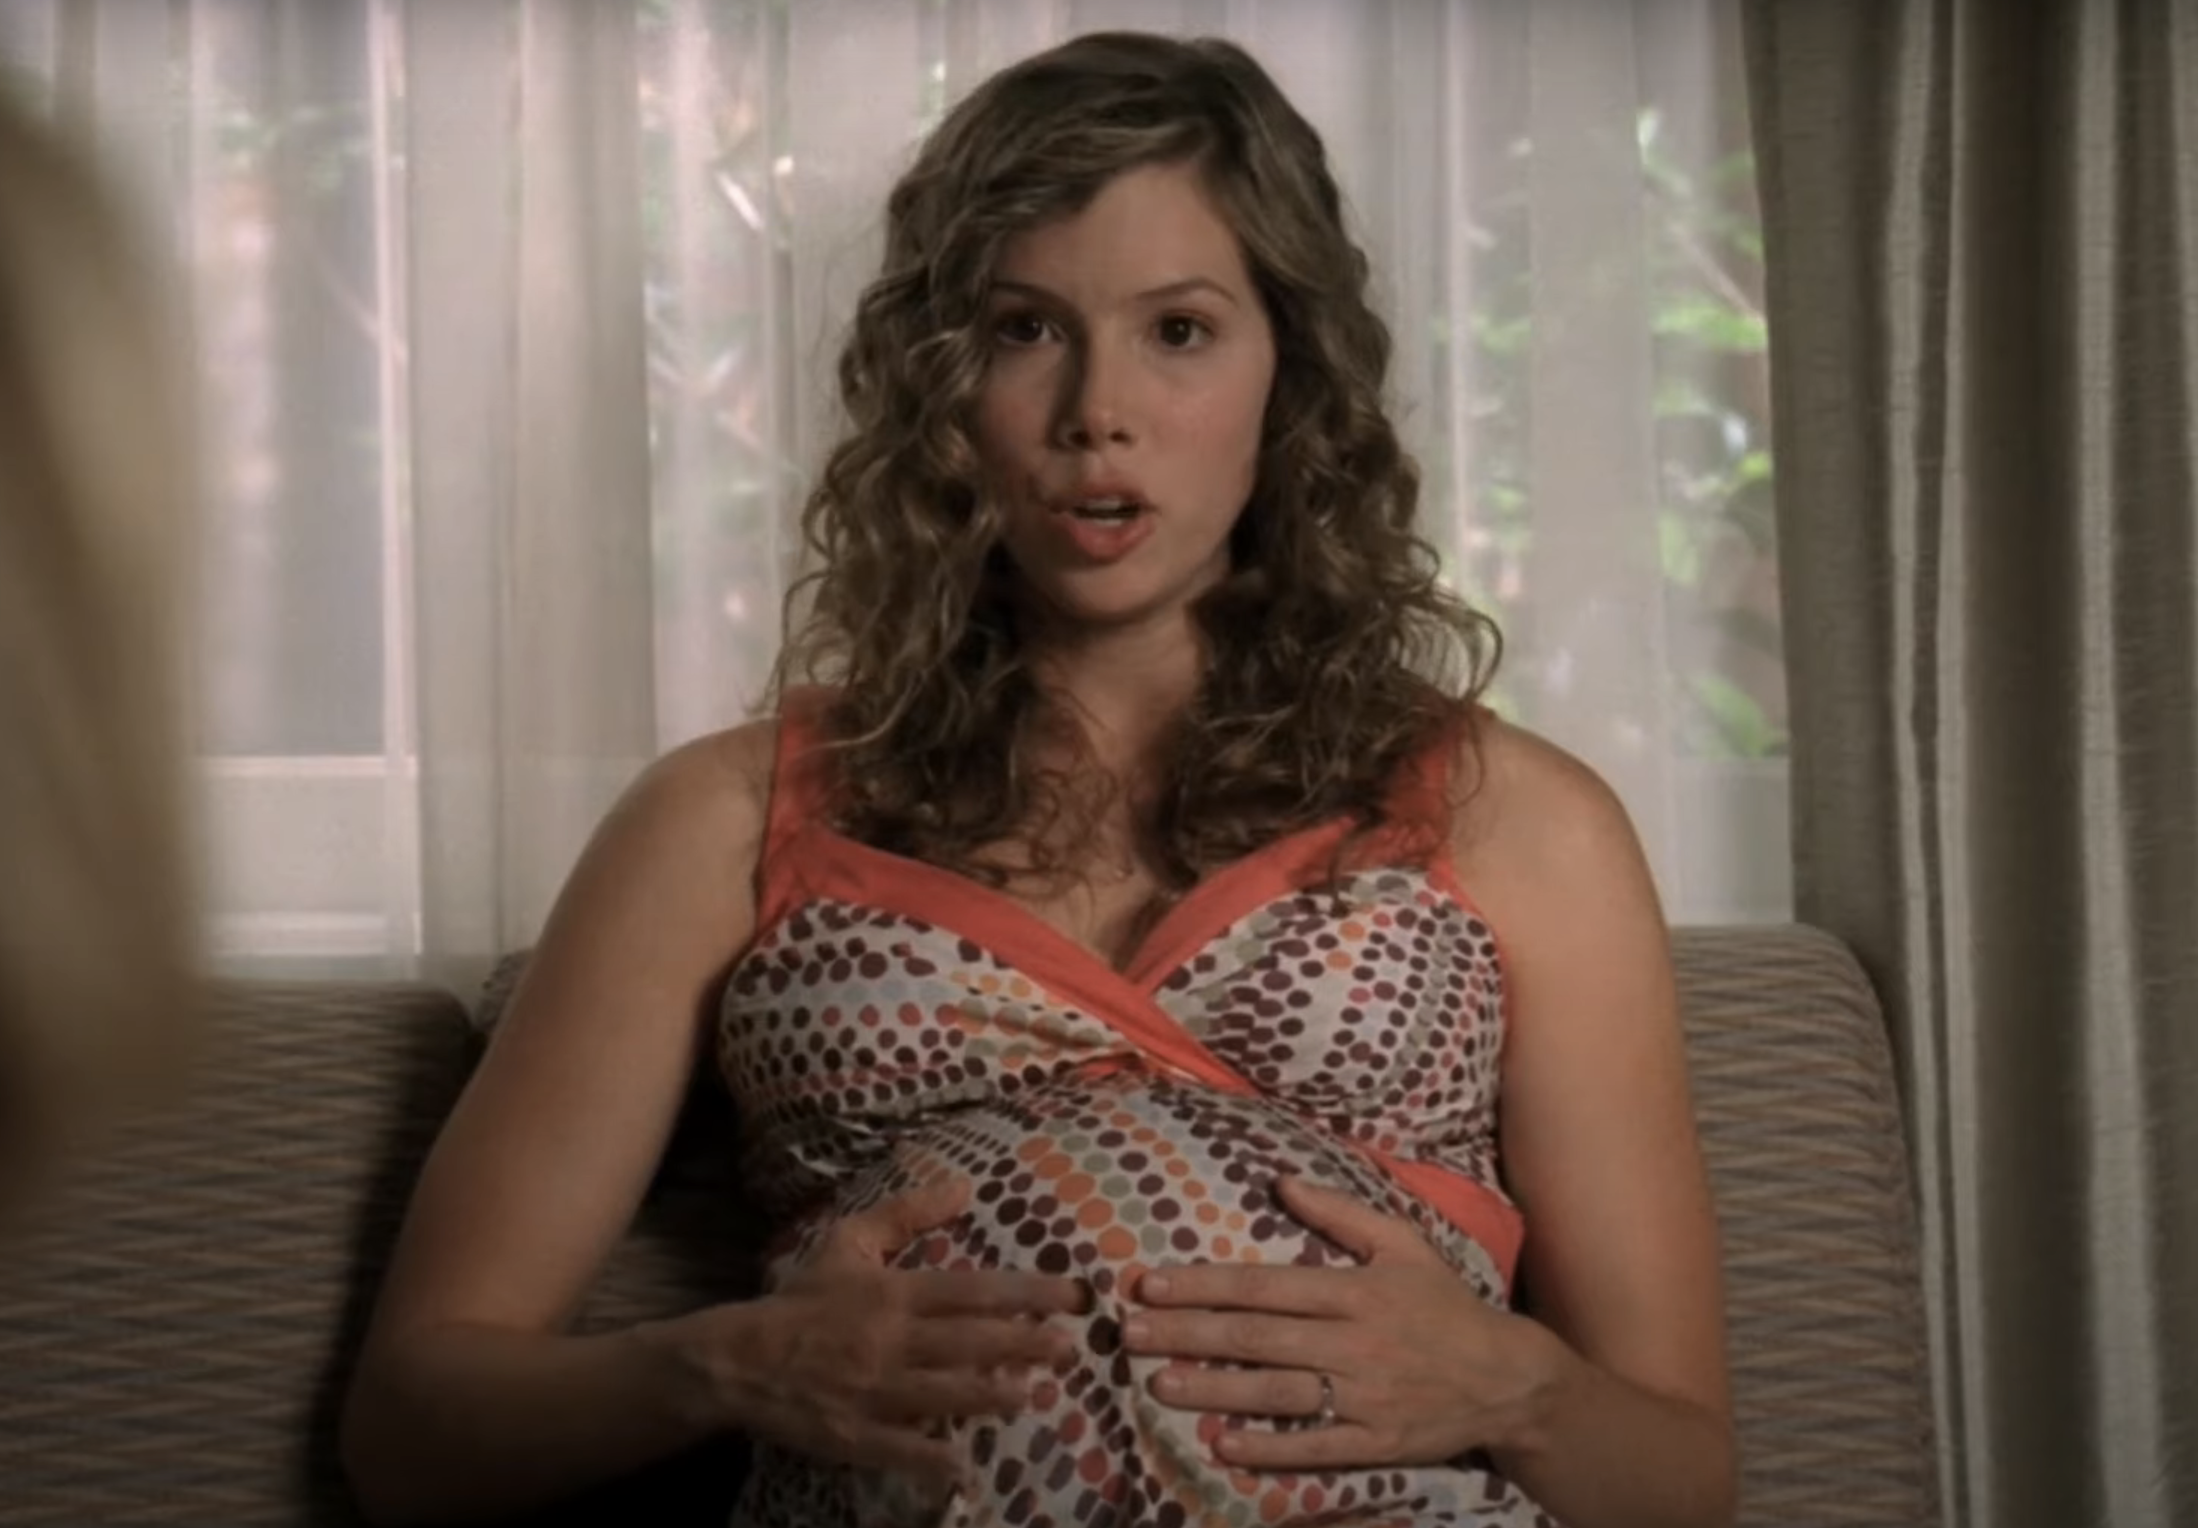 A woman in a patterned top gesturing with hands on her belly, sitting indoors